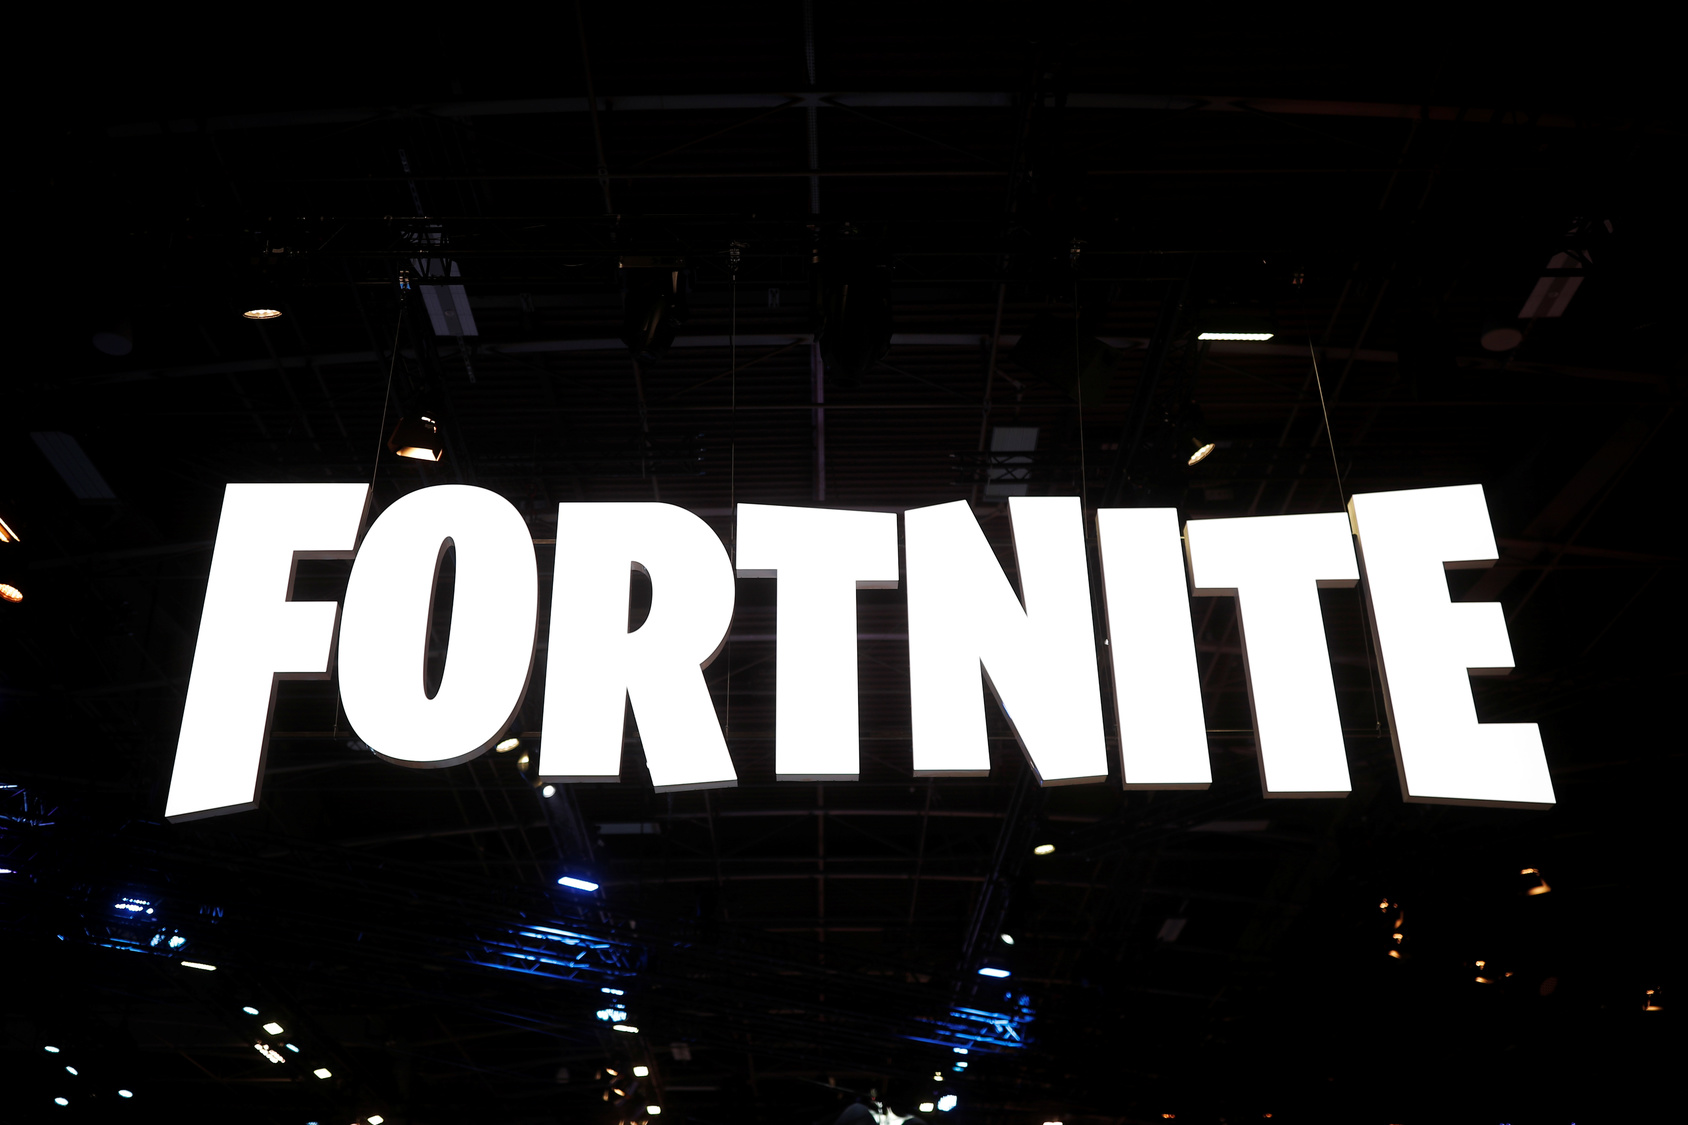 The Fortnite logo is seen at the Paris Games Week (PGW), a trade fair for video games in Paris, France, October 25, 2018. Image Source: REUTERS/Benoit Tessier, via Adobe Stock 